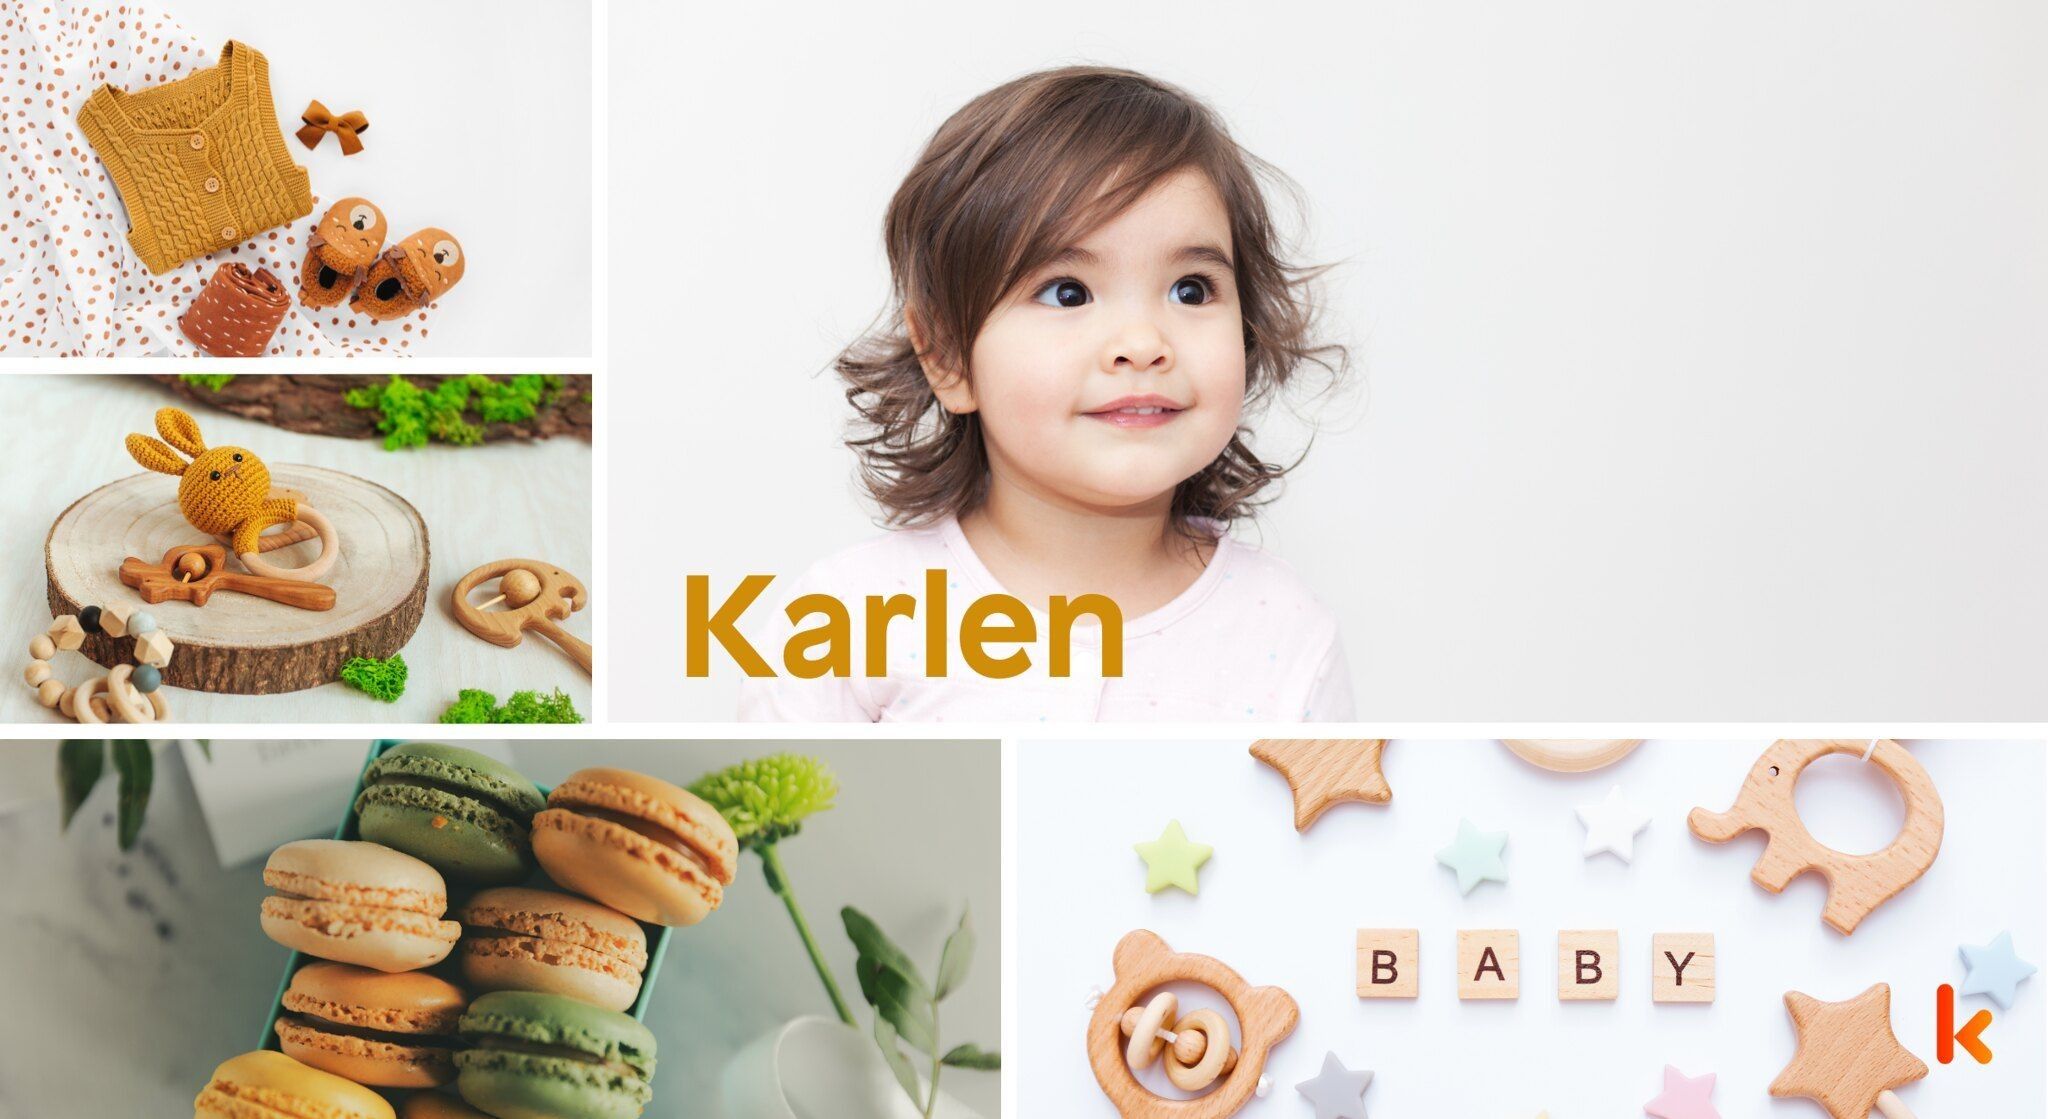 Meaning of the name Karlen